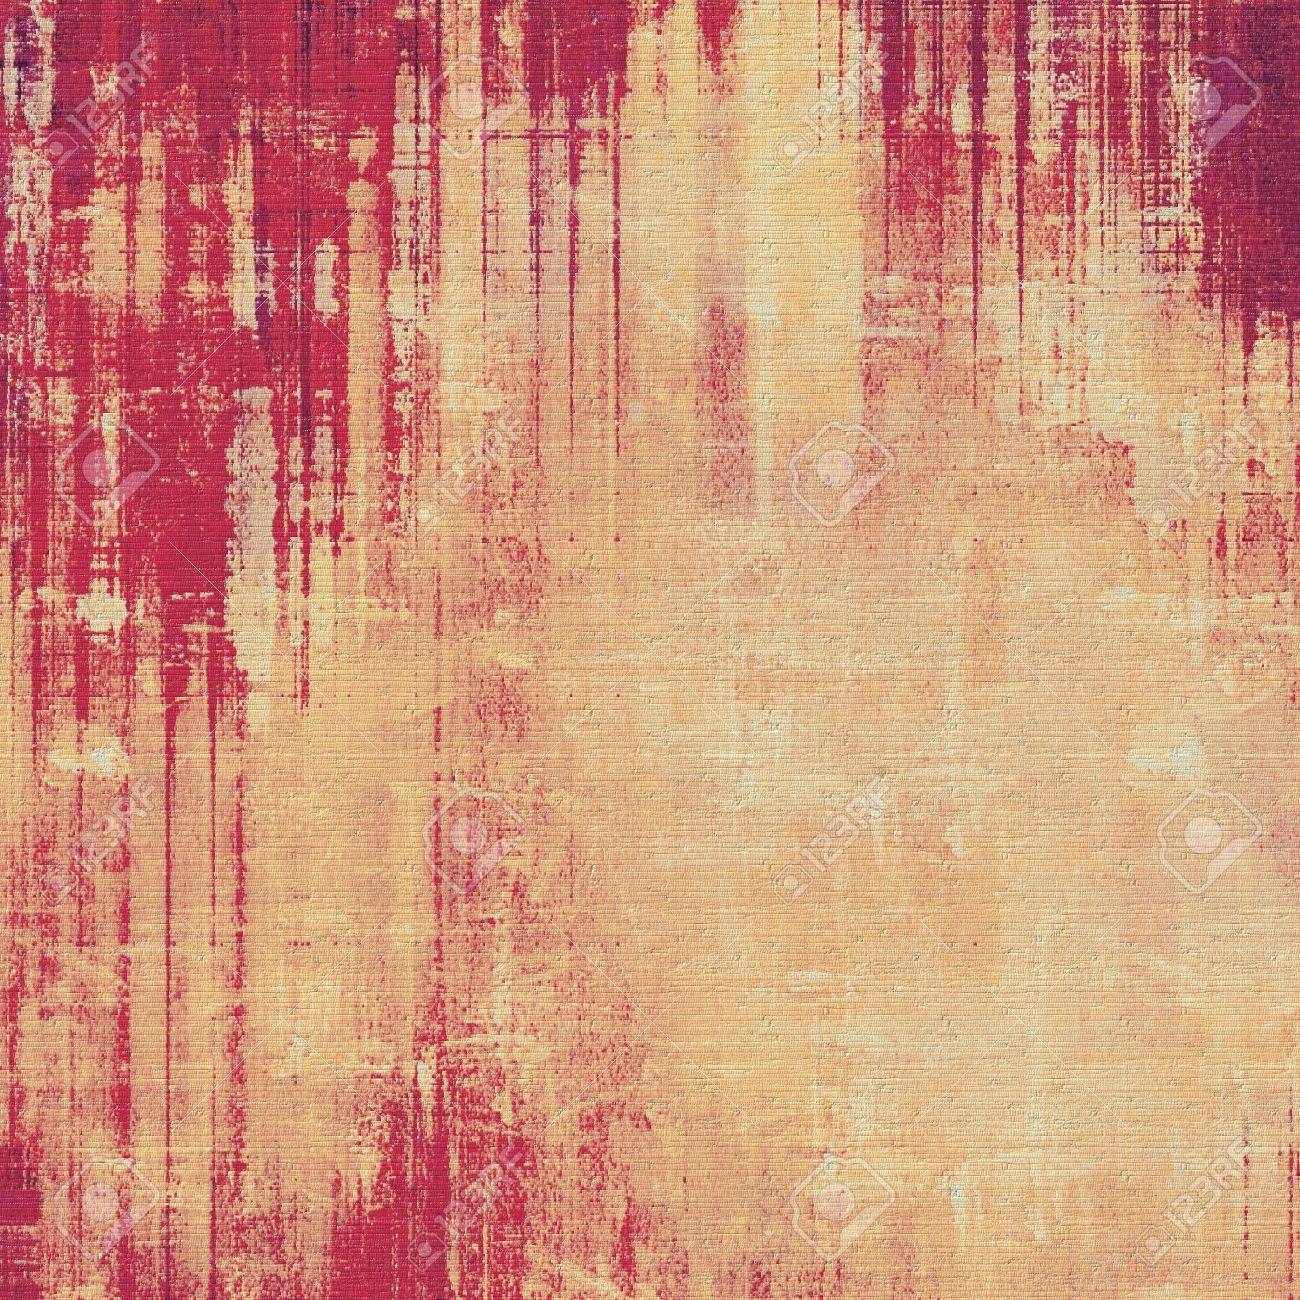 Antique Vintage Texture Old Fashioned Weathered Background